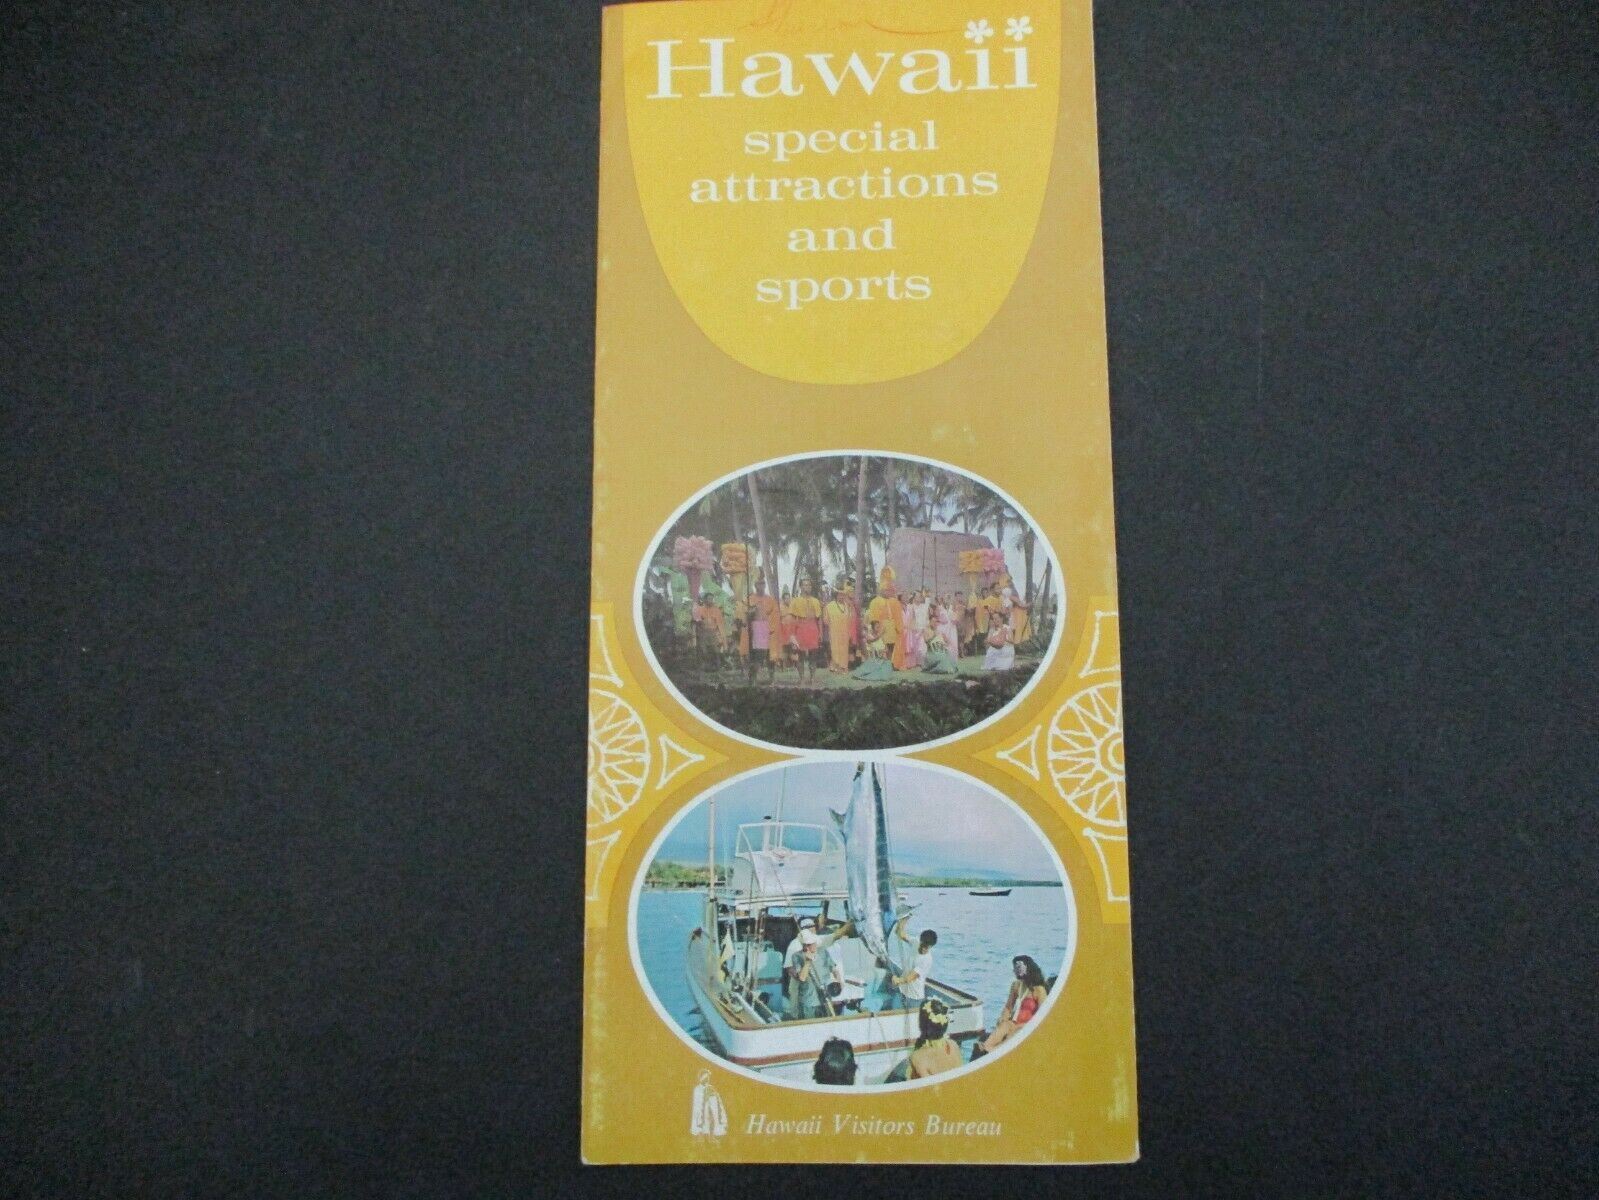 Hawaii Special Attractions and Sports travel pamphlet